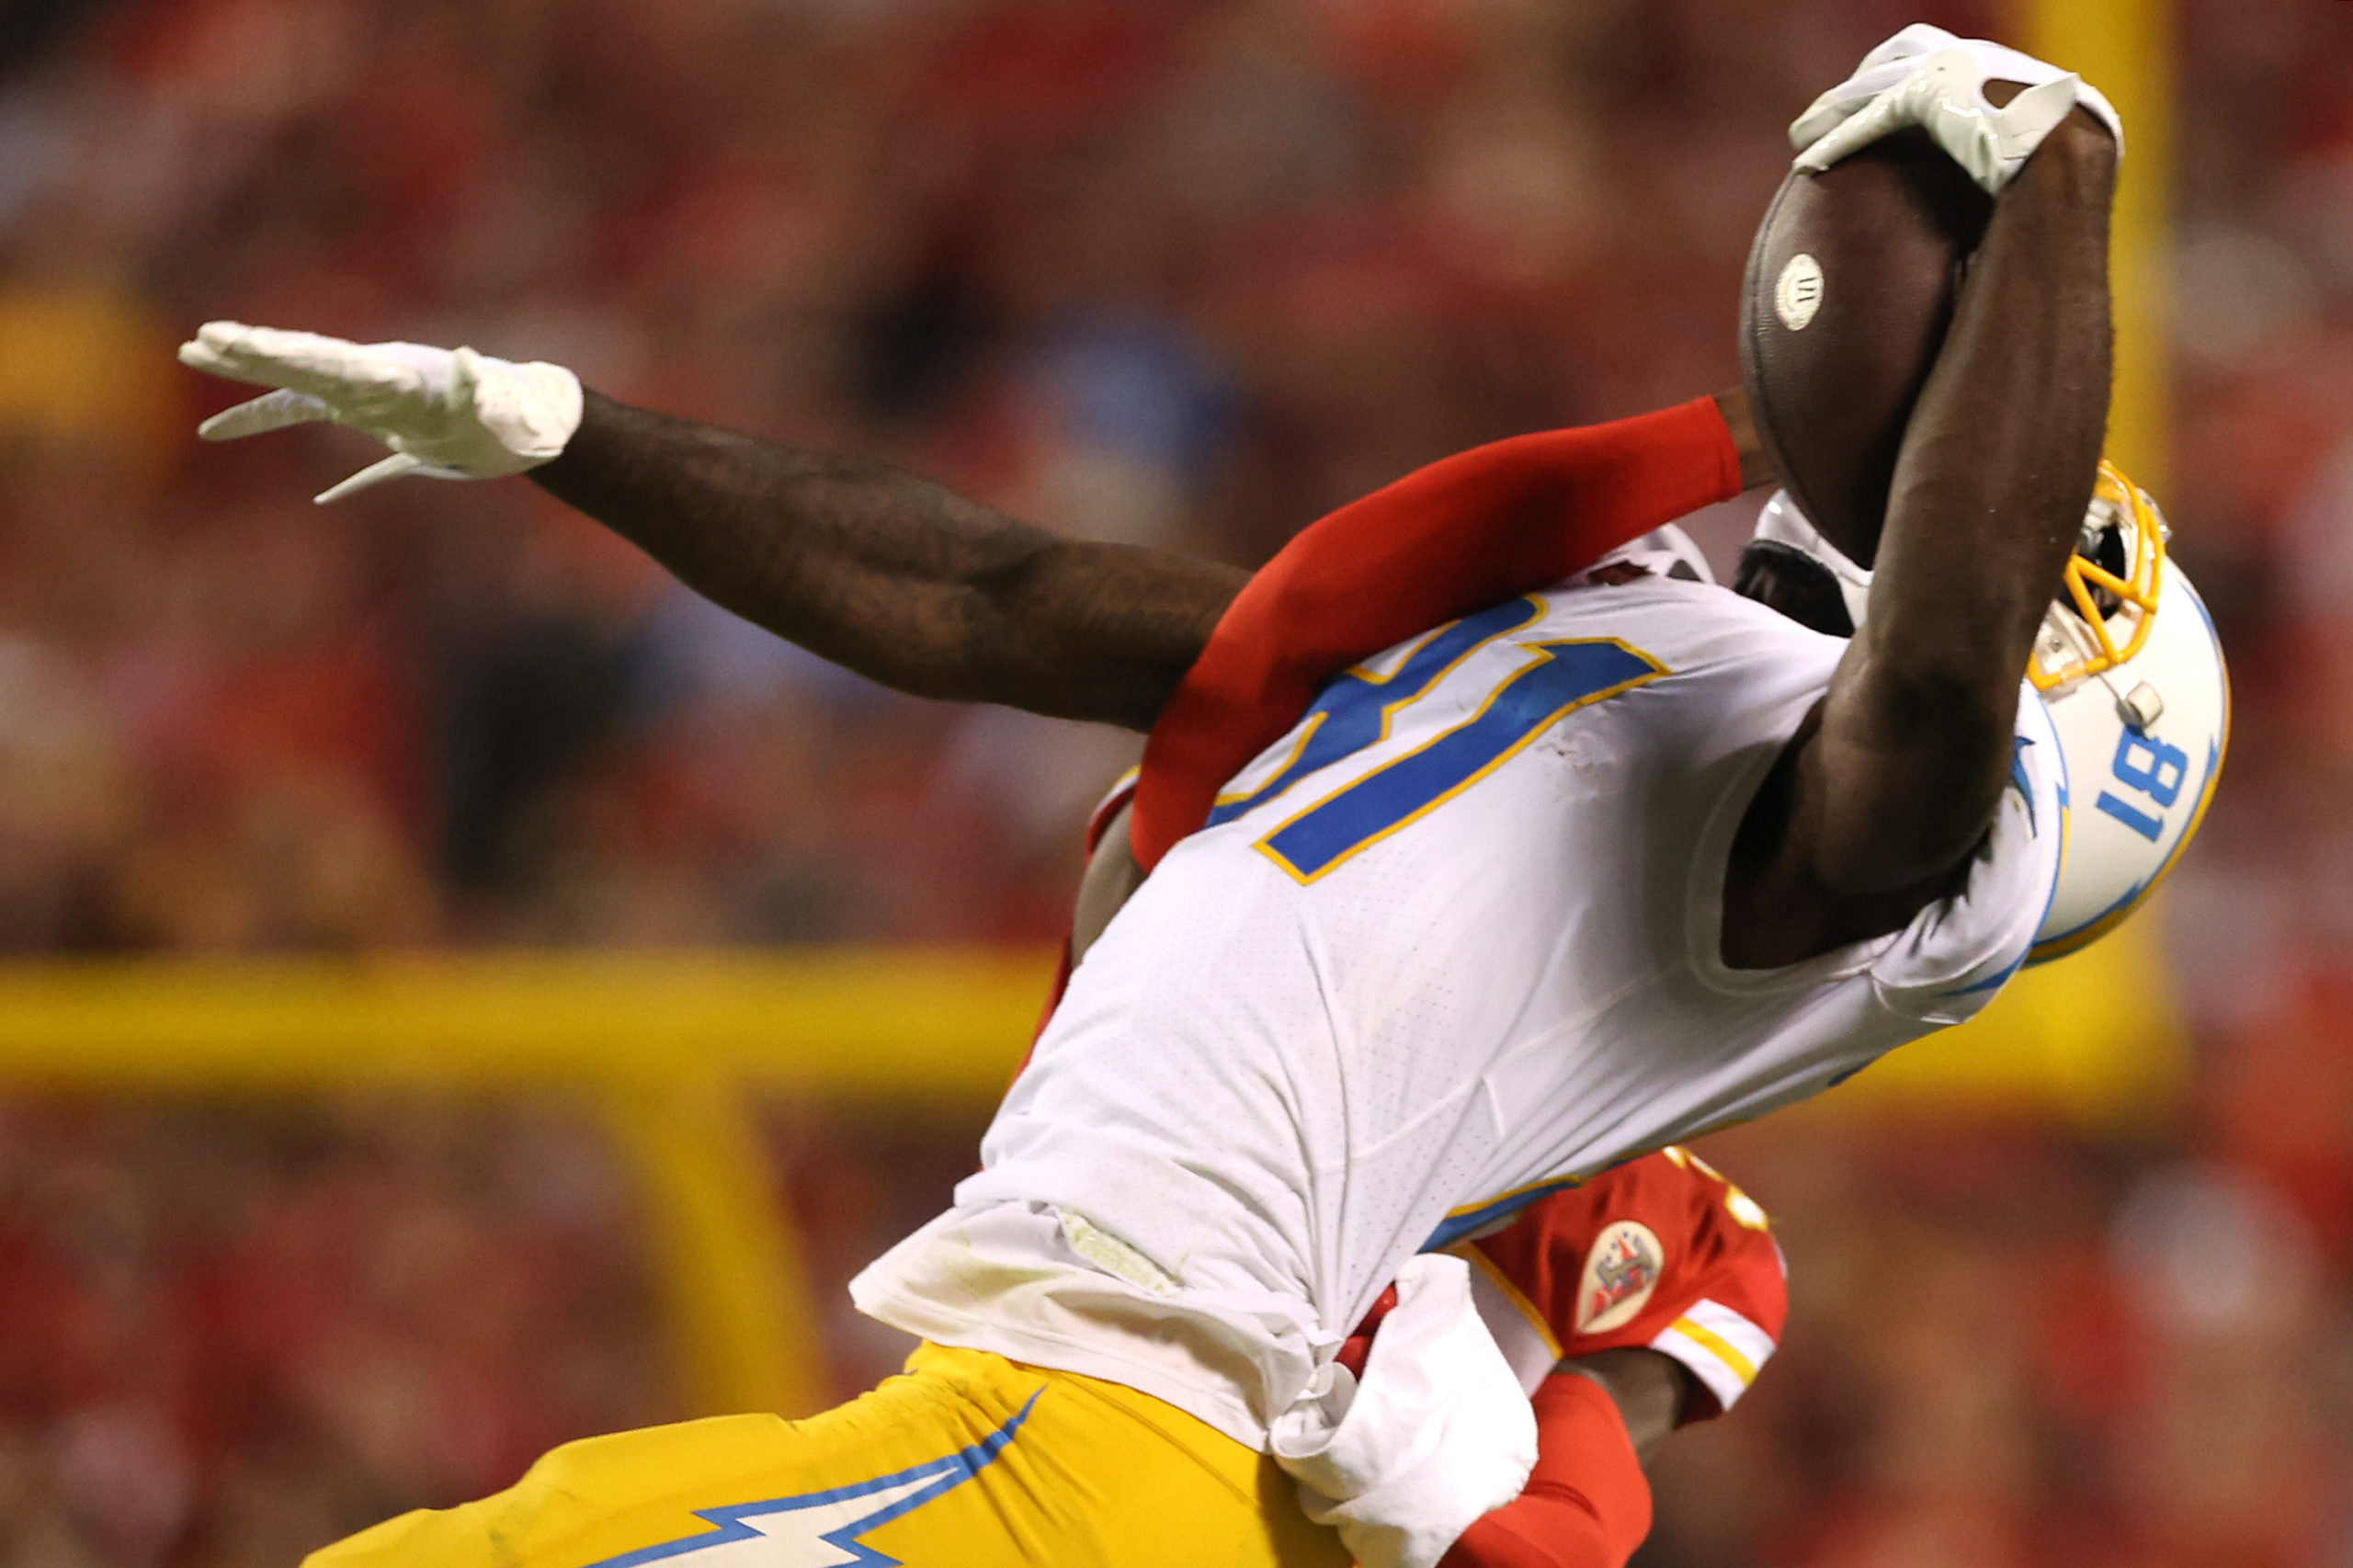 KANSAS CITY, MISSOURI - SEPTEMBER 15: Mike Williams #81 of the Los Angeles Chargers catches the ball during the first half against the Kansas City Chiefs at Arrowhead Stadium on September 15, 2022 in Kansas City, Missouri. Jamie Squire/Getty Images